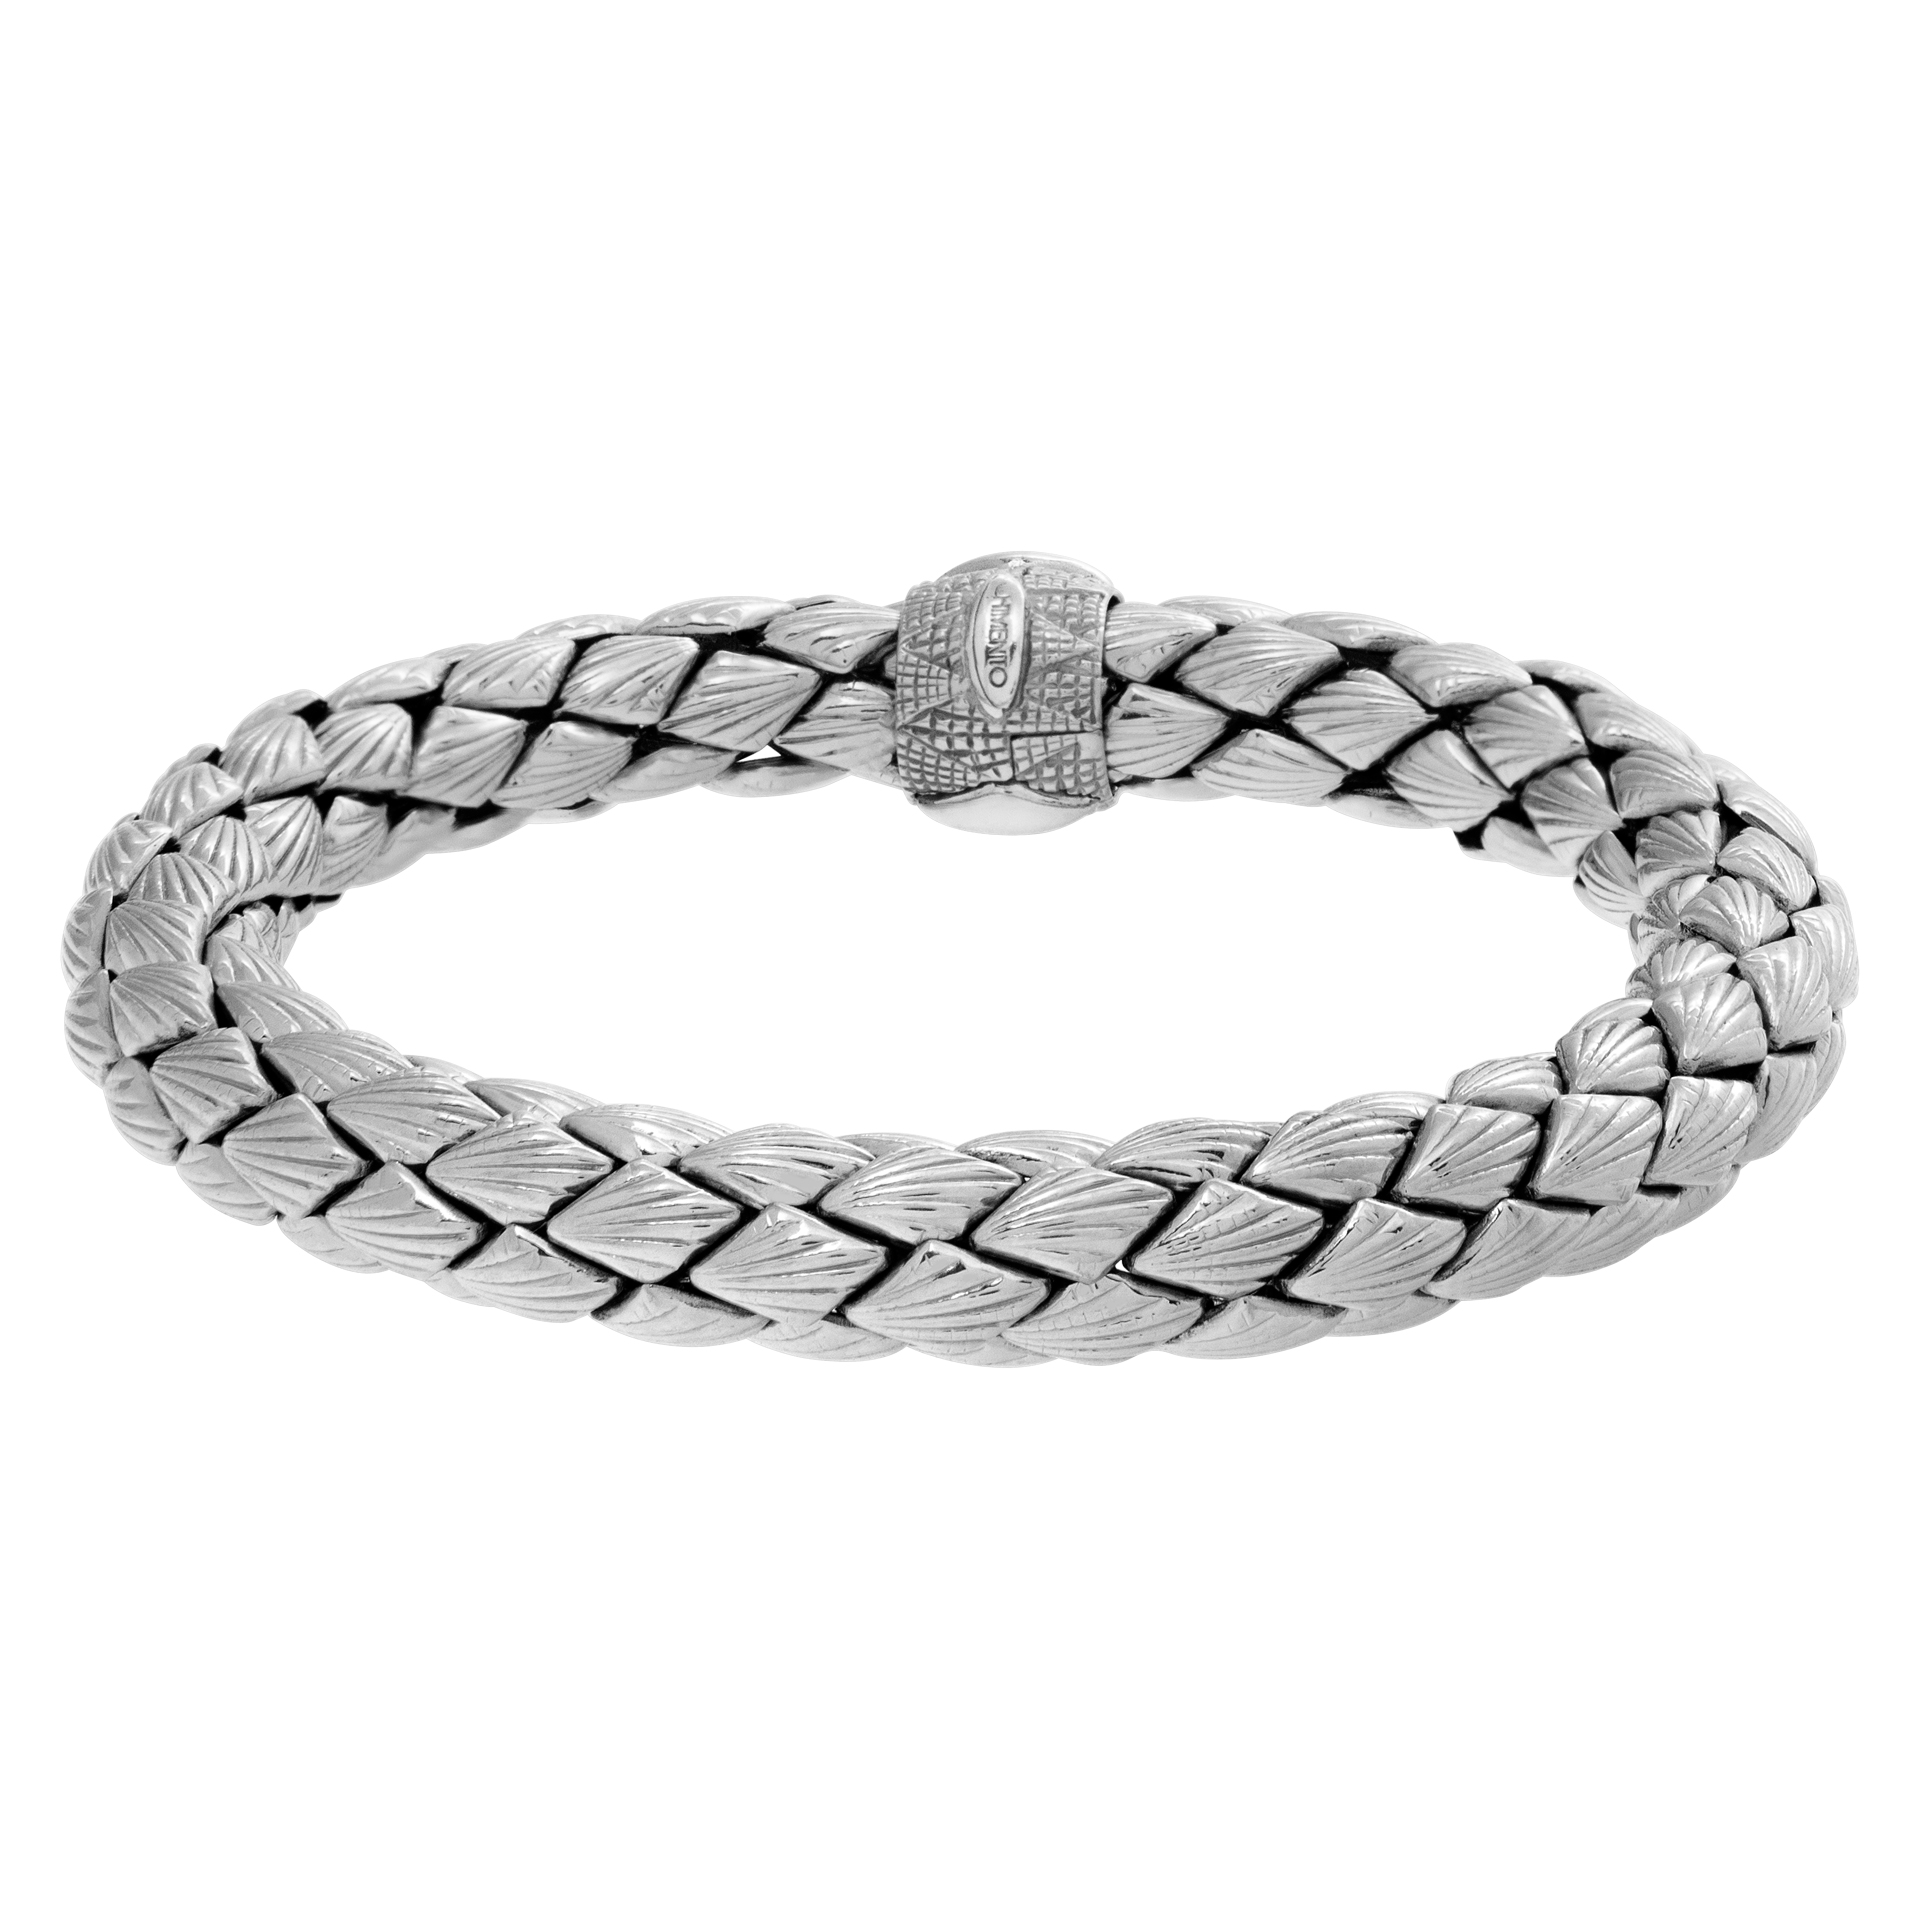 Chimento breaded bracelet in 18k white gold with diamond accent on the clasp. image 1